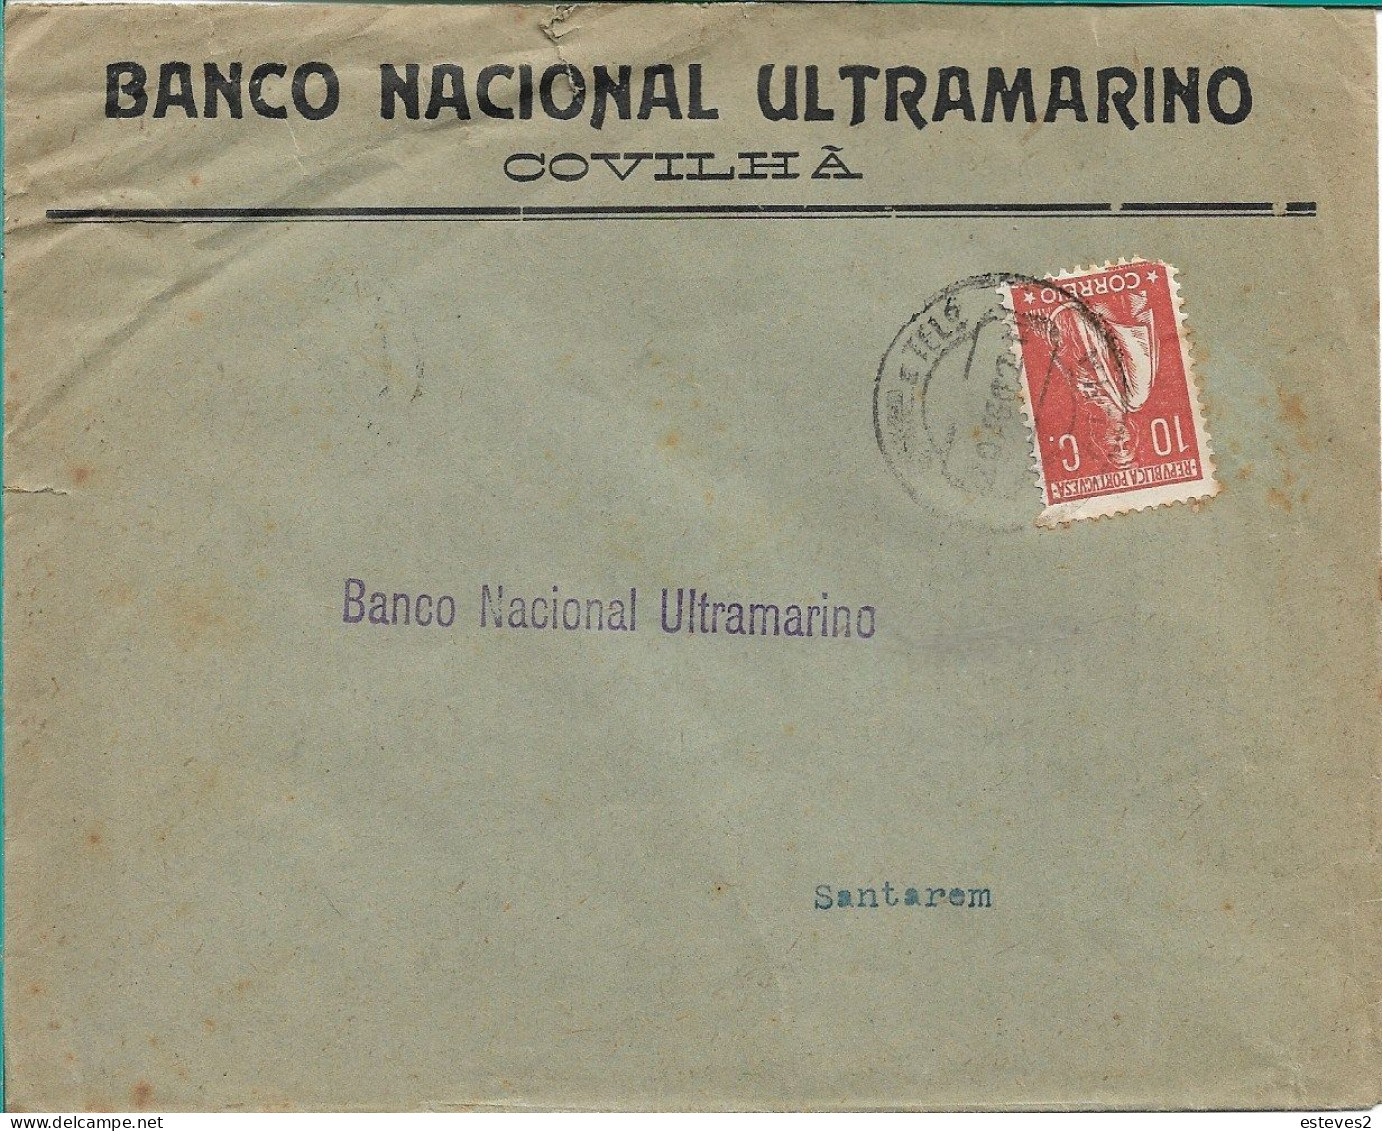 BANCO NACIONAL ULTRAMARINO , 1921 , Commercial Cover From Covilhã To Santarém , Ceres Stamp - Portugal